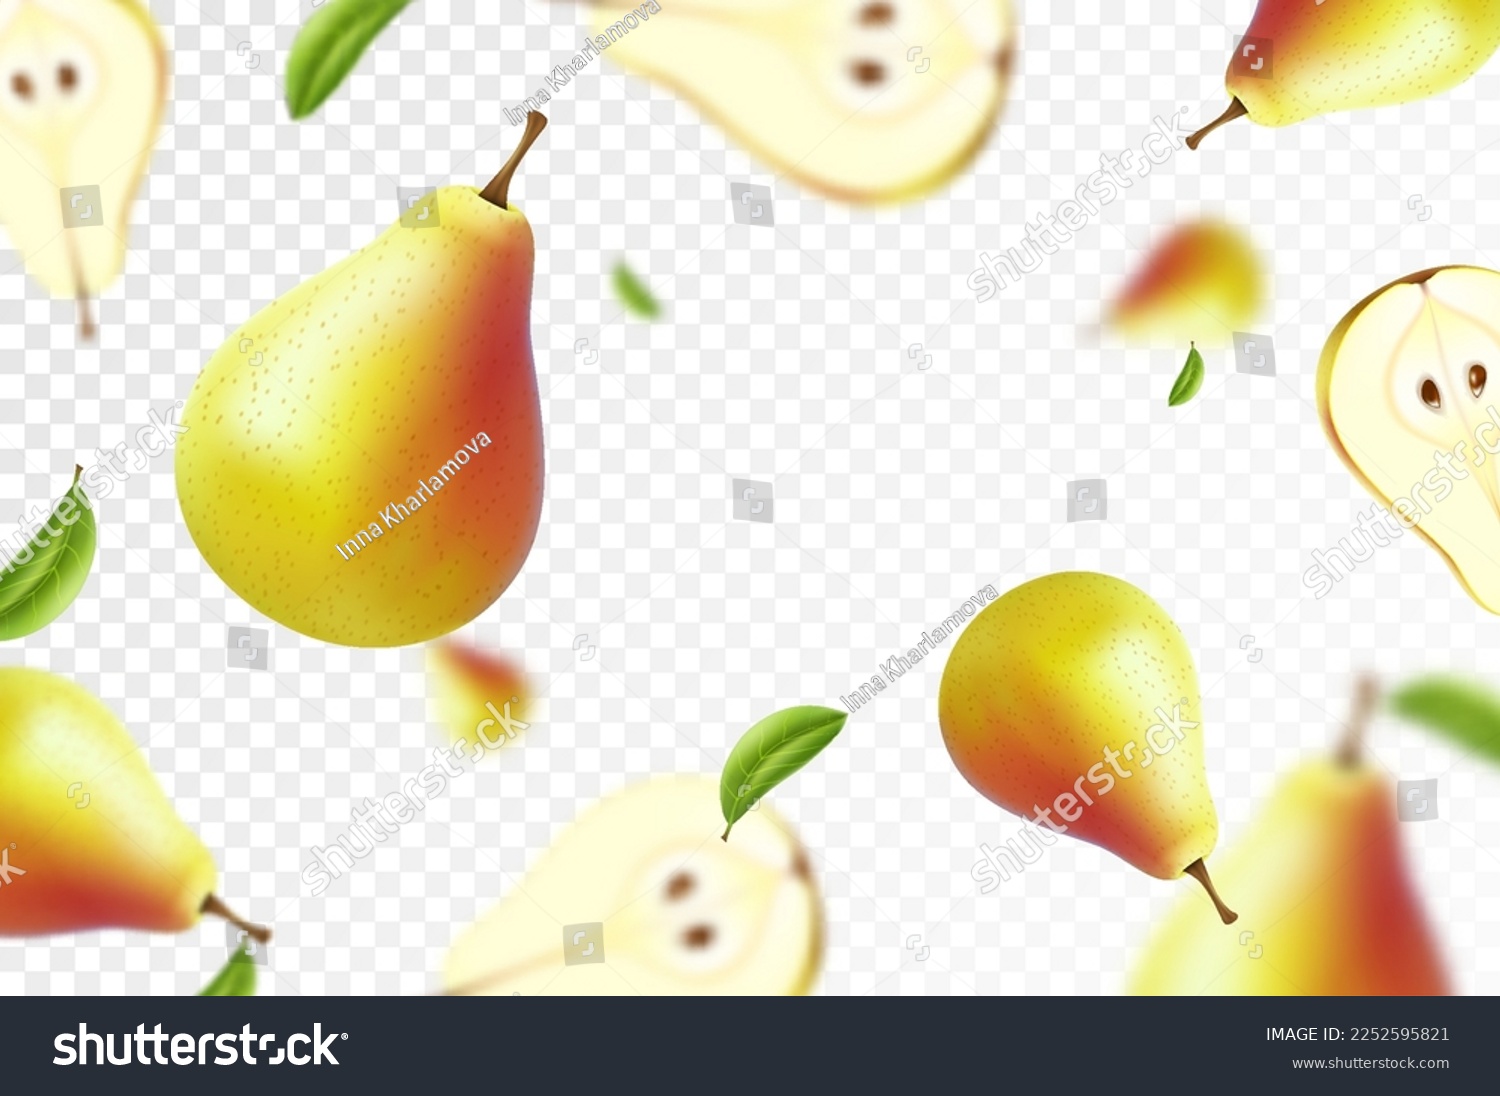 Ripe pear background. Flying juicy pear isolated on transparent background. Blurry effect. Can be used for wallpaper, banner, poster, print, fabric, wrapping paper. Realistic 3d vector illustration #2252595821